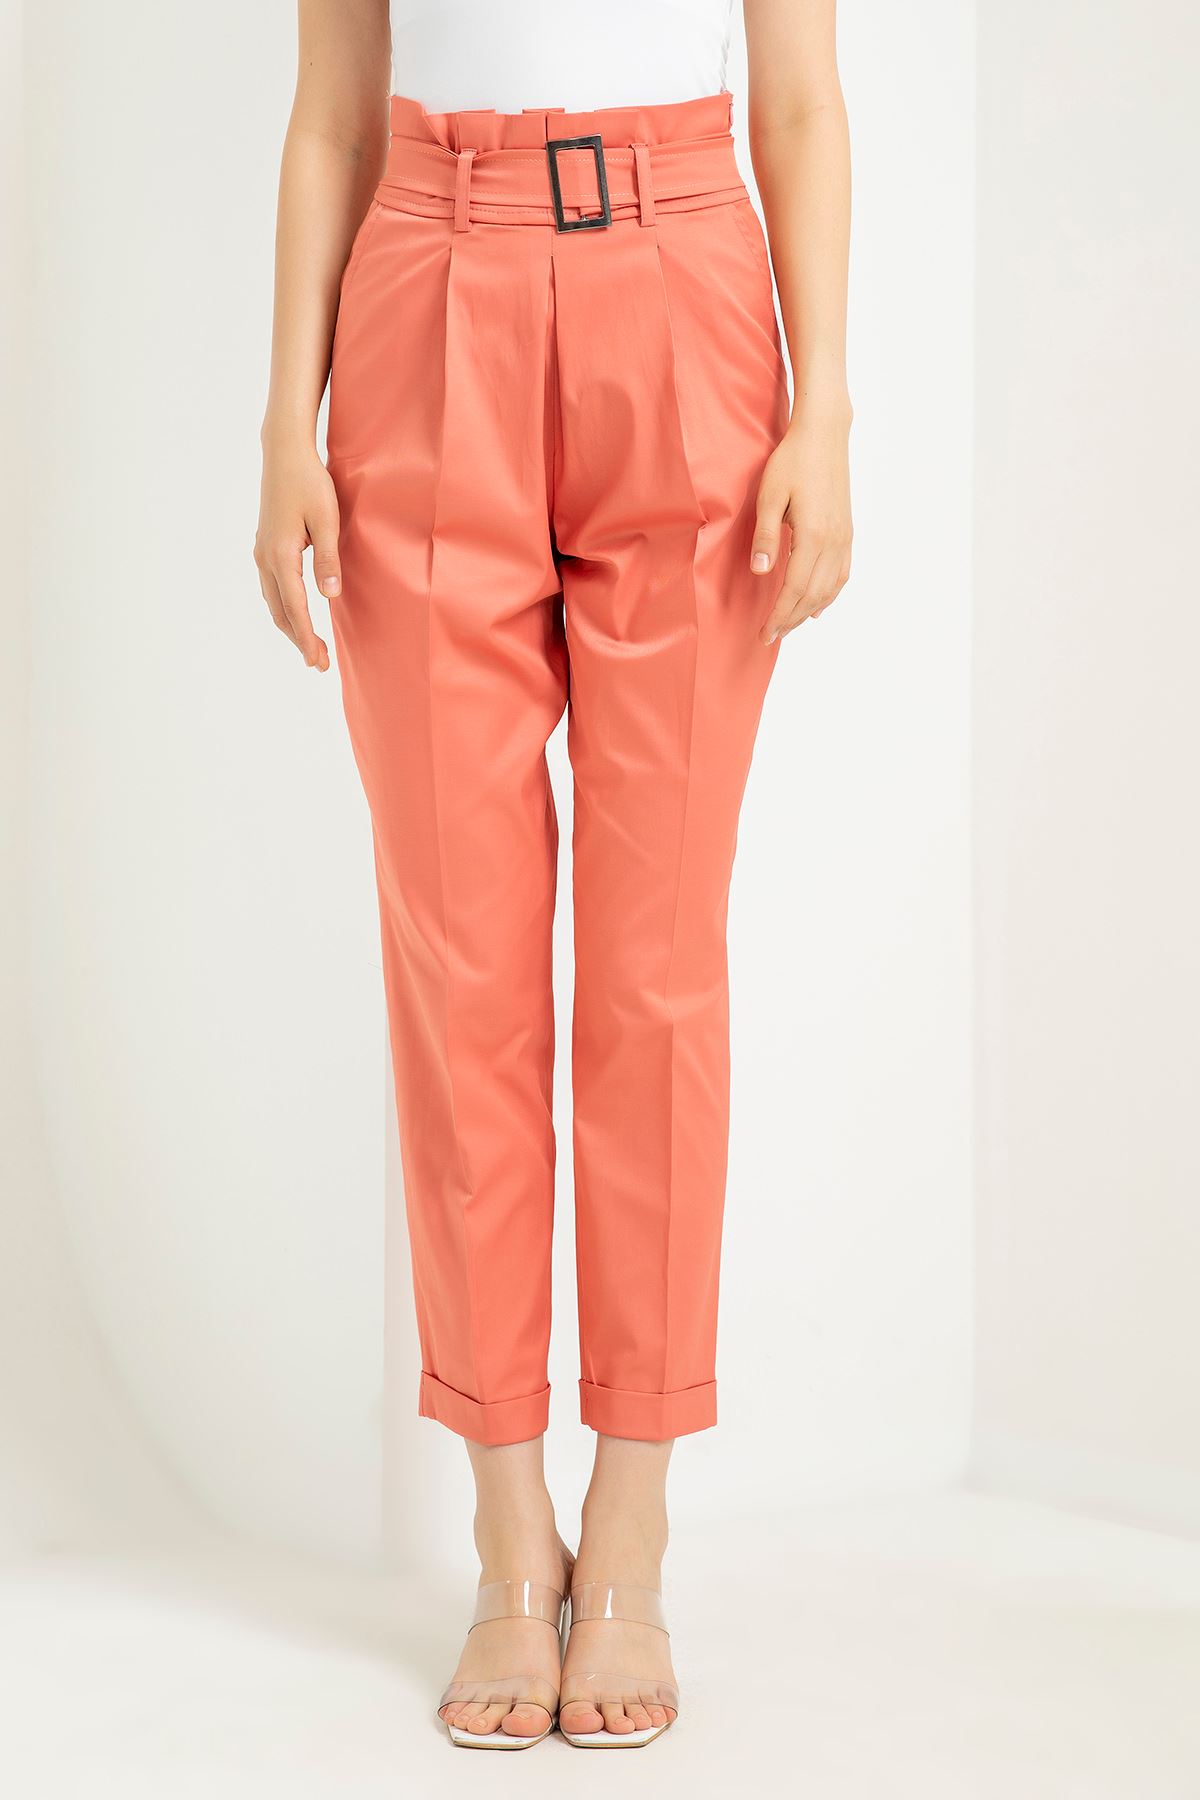 Erika Fabric Ankle Length Carrot Style Women'S Trouserwith Belt - Salmon Pink